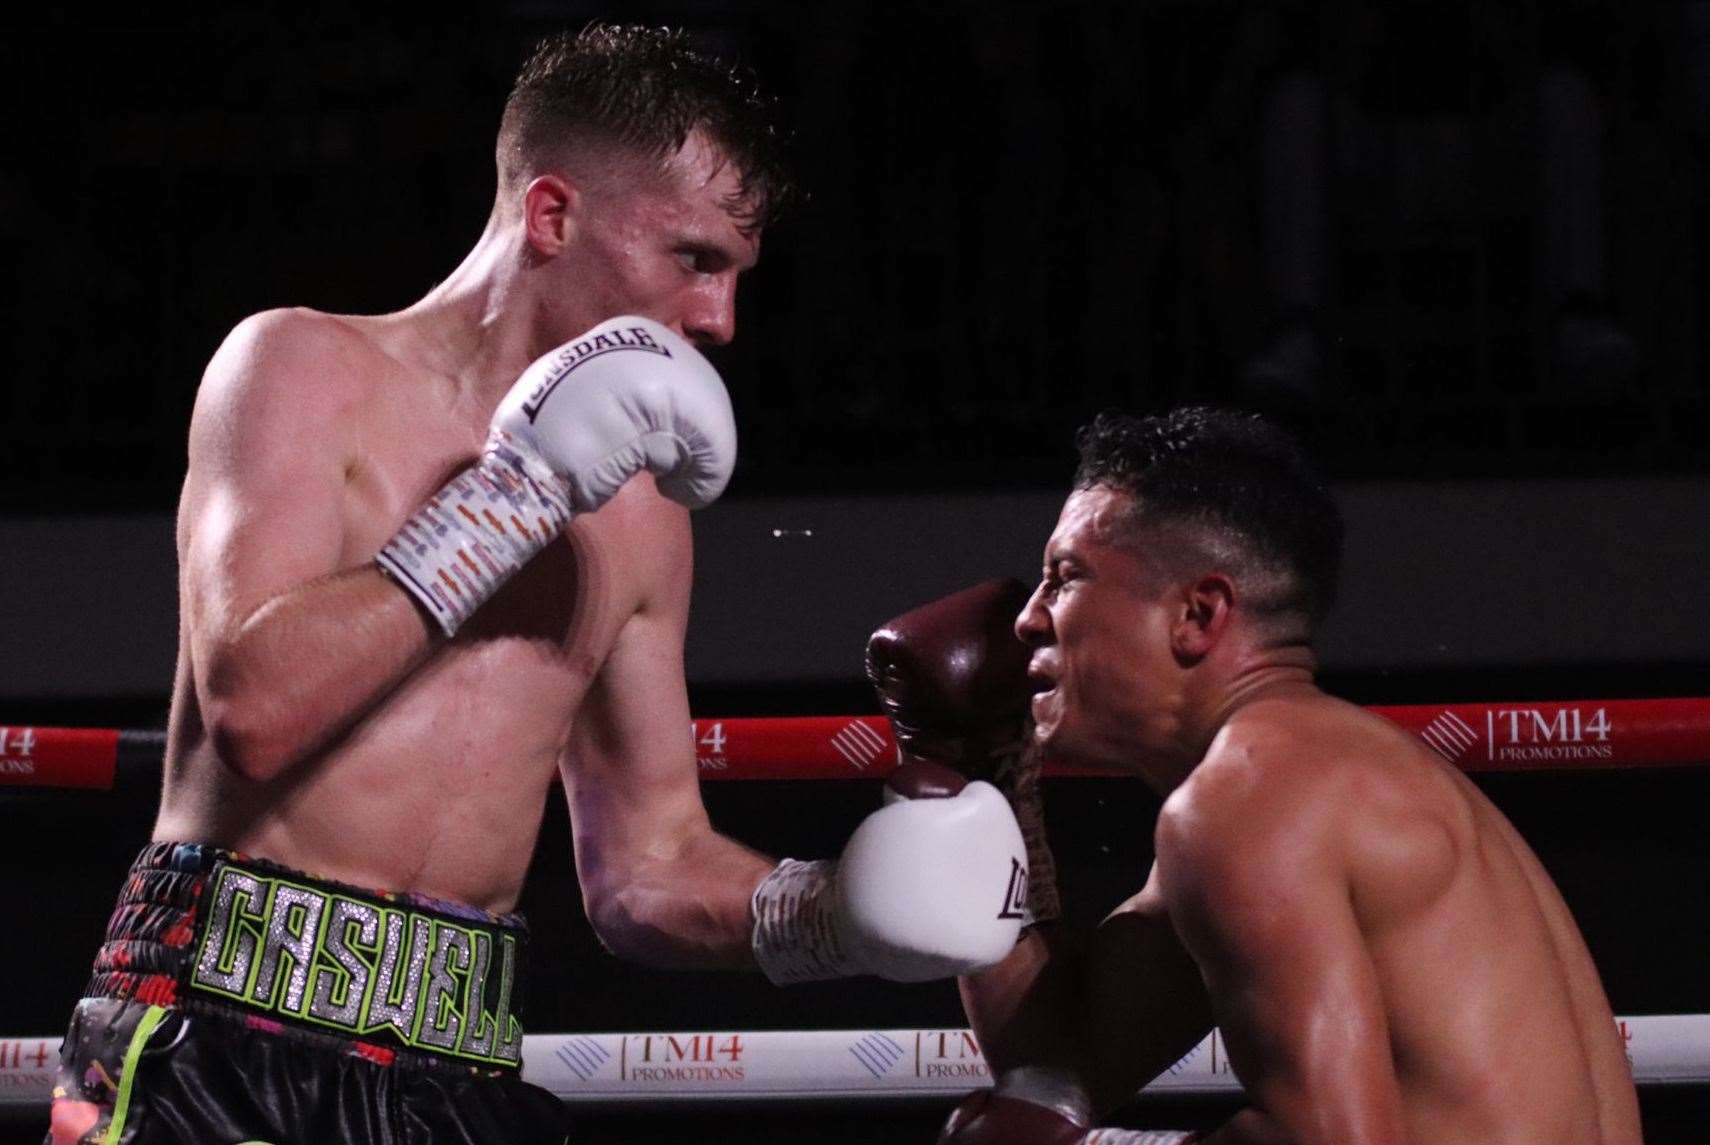 Chatham's Robert Caswell beats Jayro Fernando Duran on points at York Hall Picture: Max English @max_ePhotos